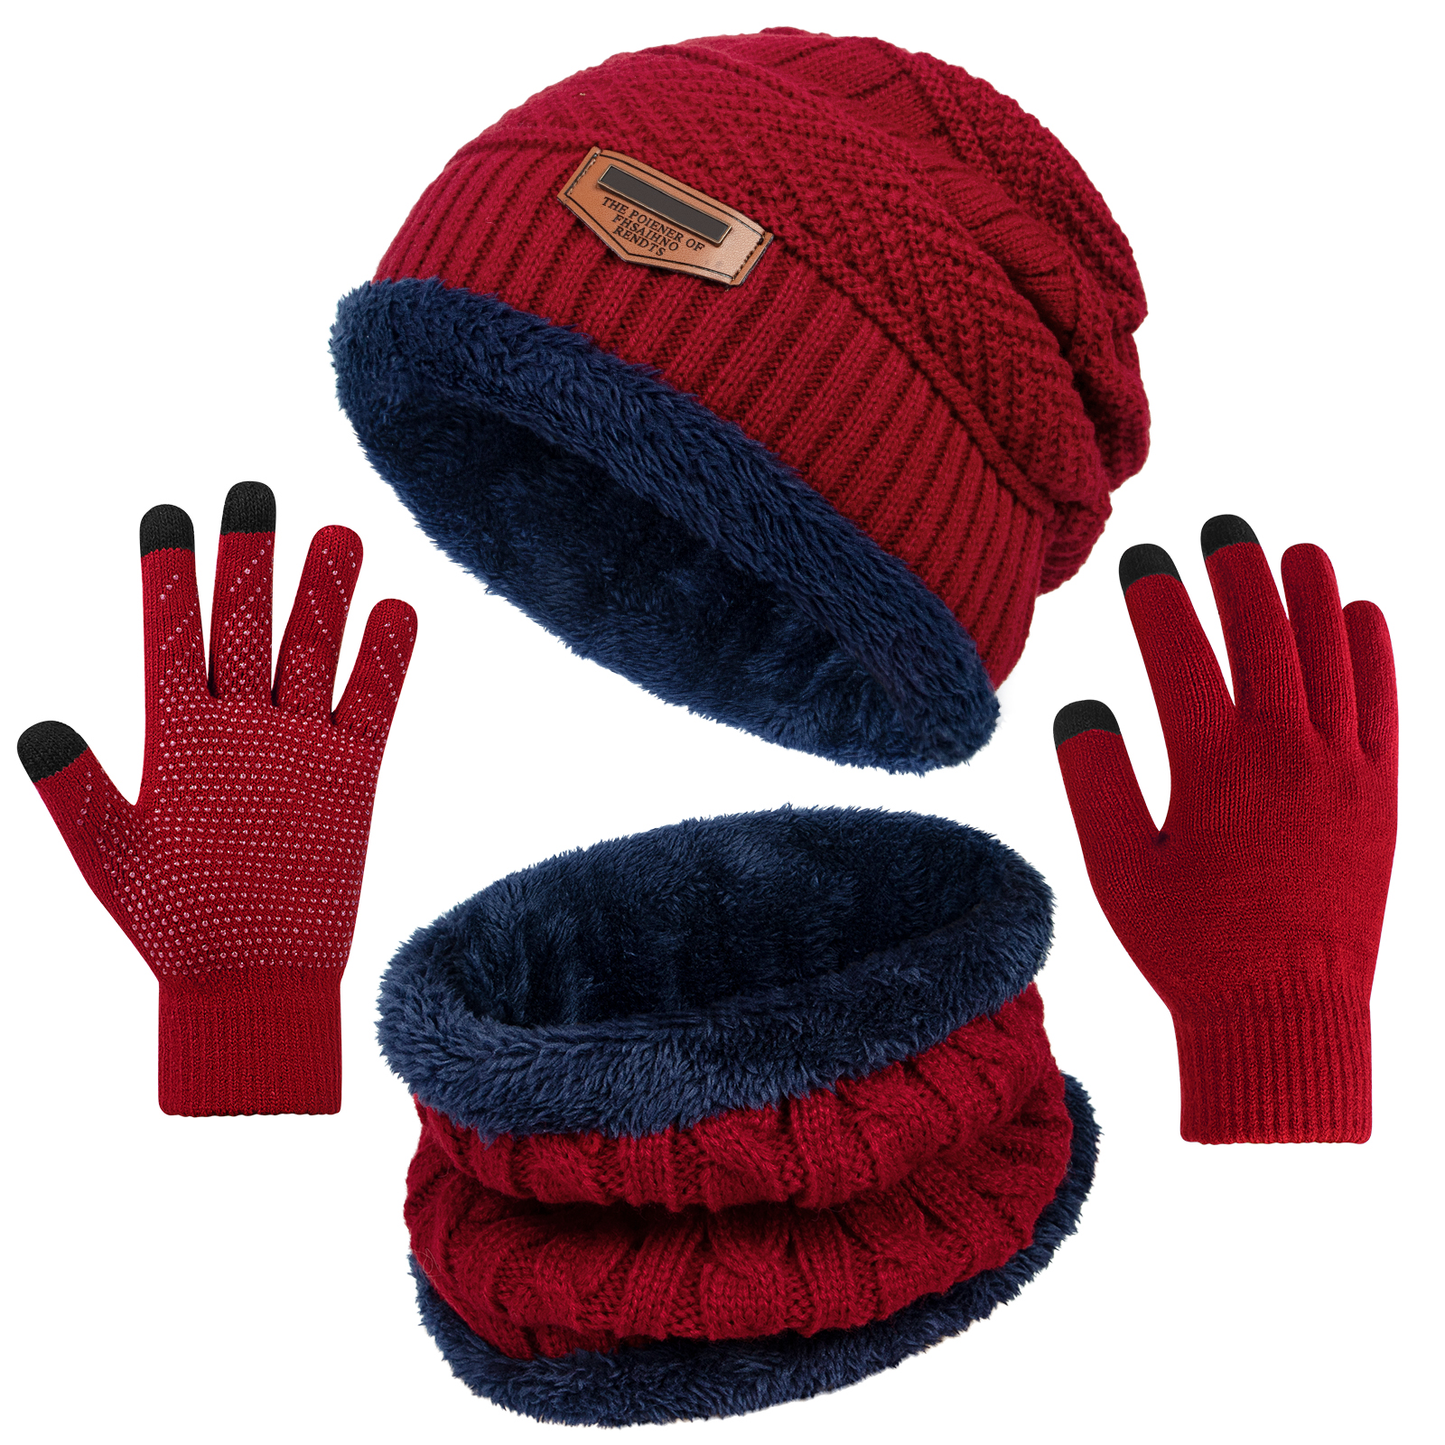 Loritta 3 Pieces Winter Beanie Hat Scarf and Touch Screen Gloves Set Warm Knit Skull Cap Gifts for Men and Women